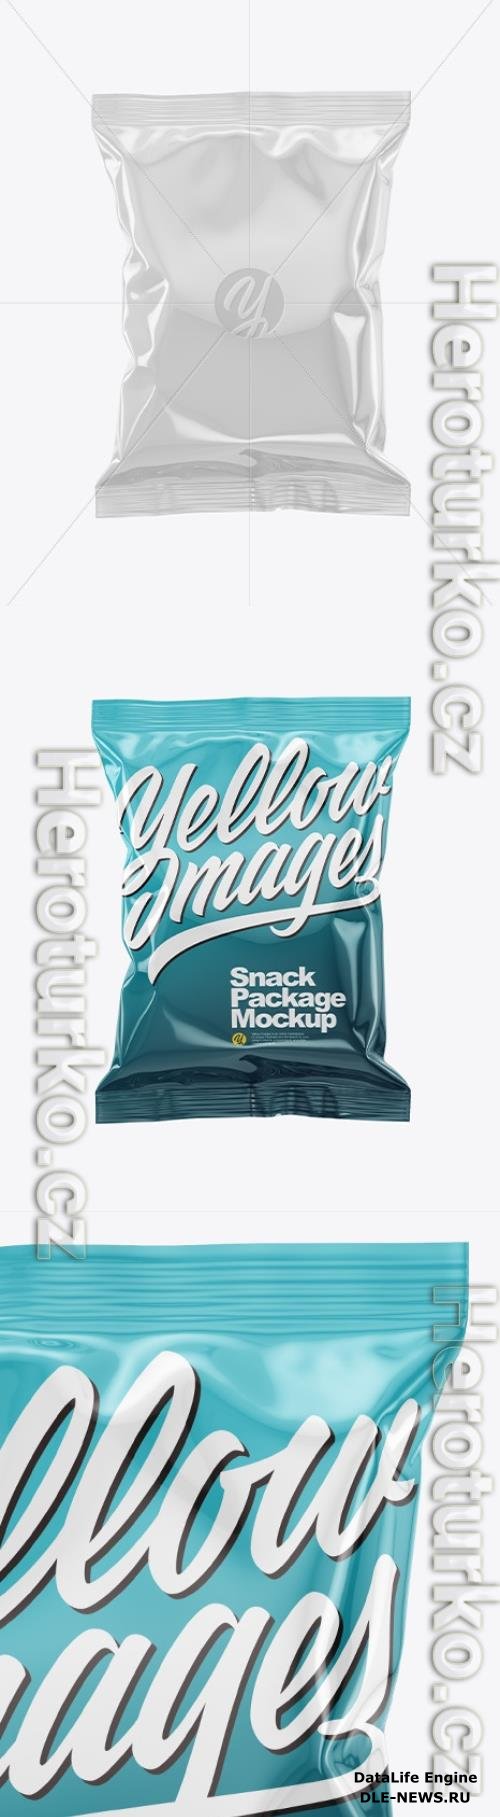 Glossy Snack Package Mockup 50510